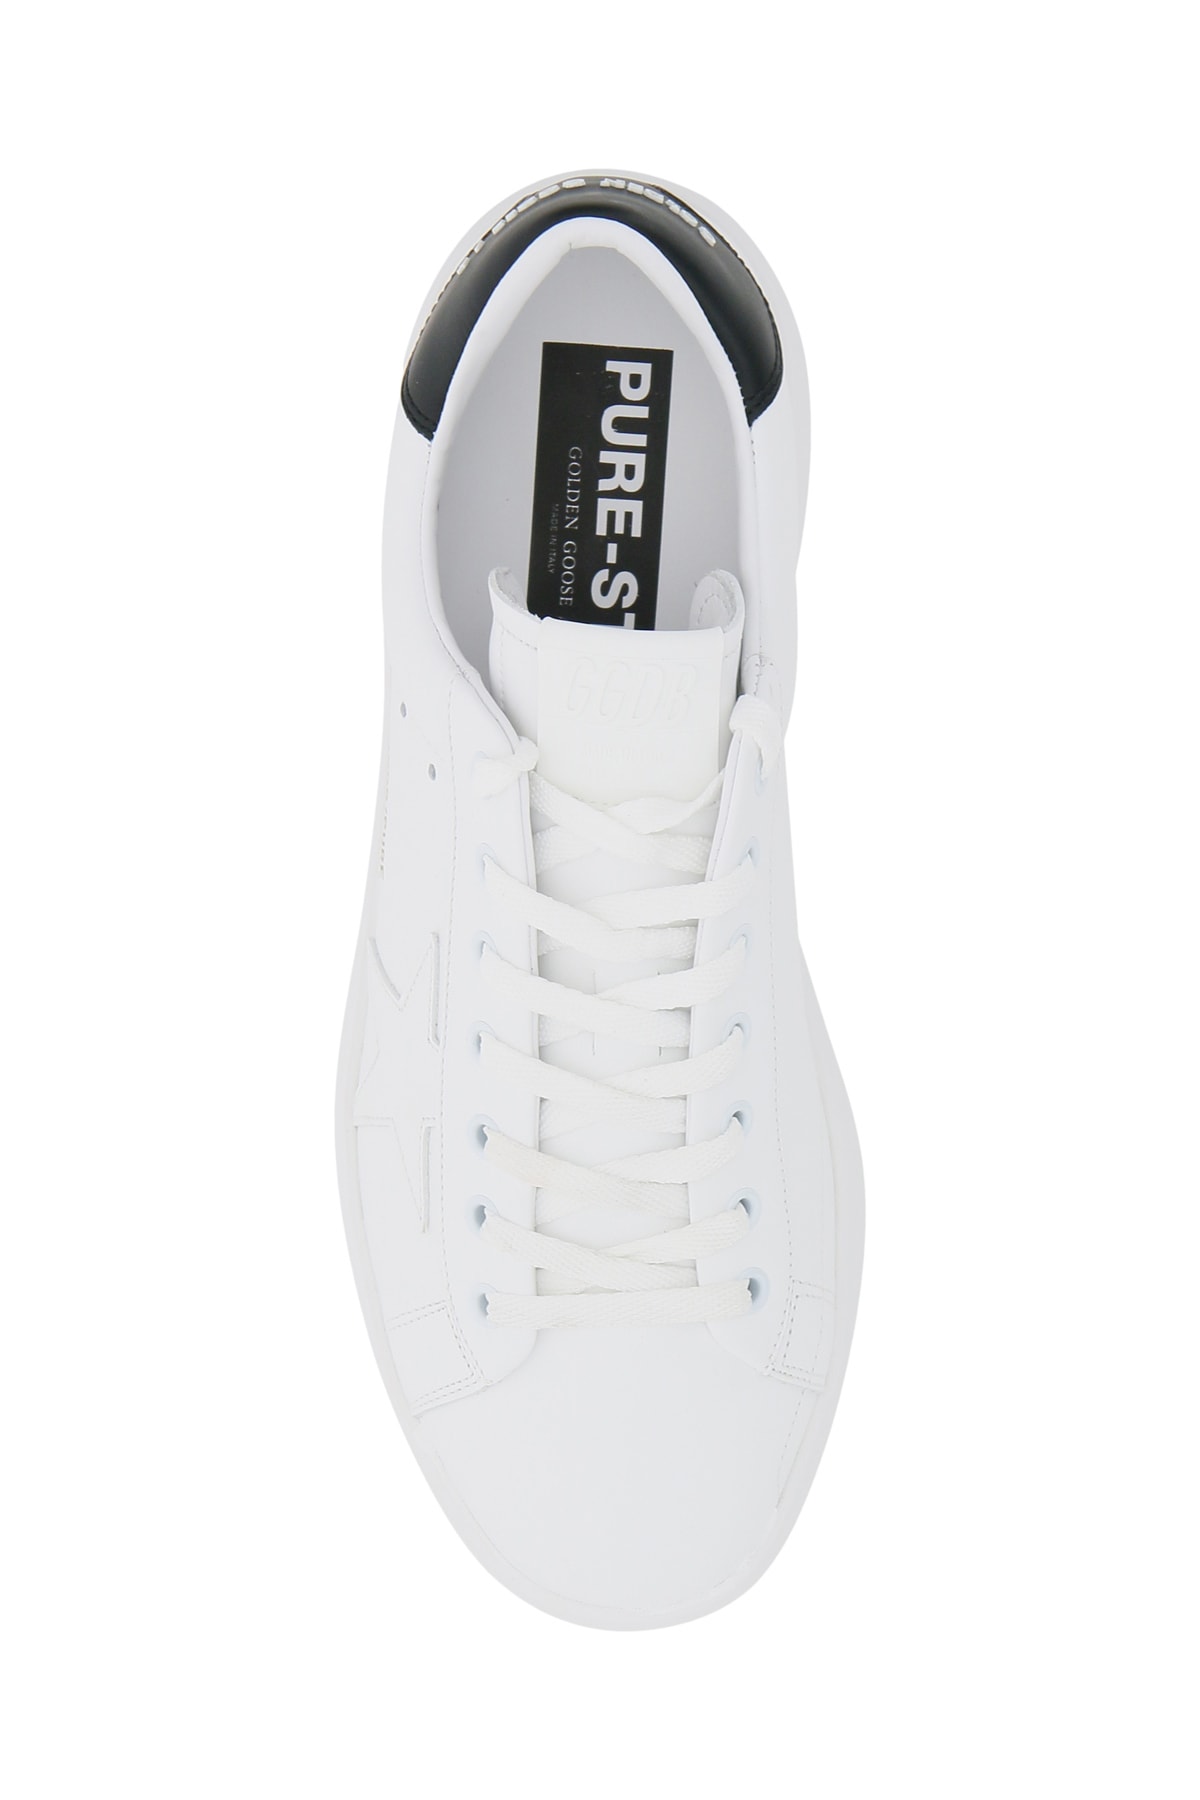 Shop Golden Goose Pure-star Sneakers In White Black (white)